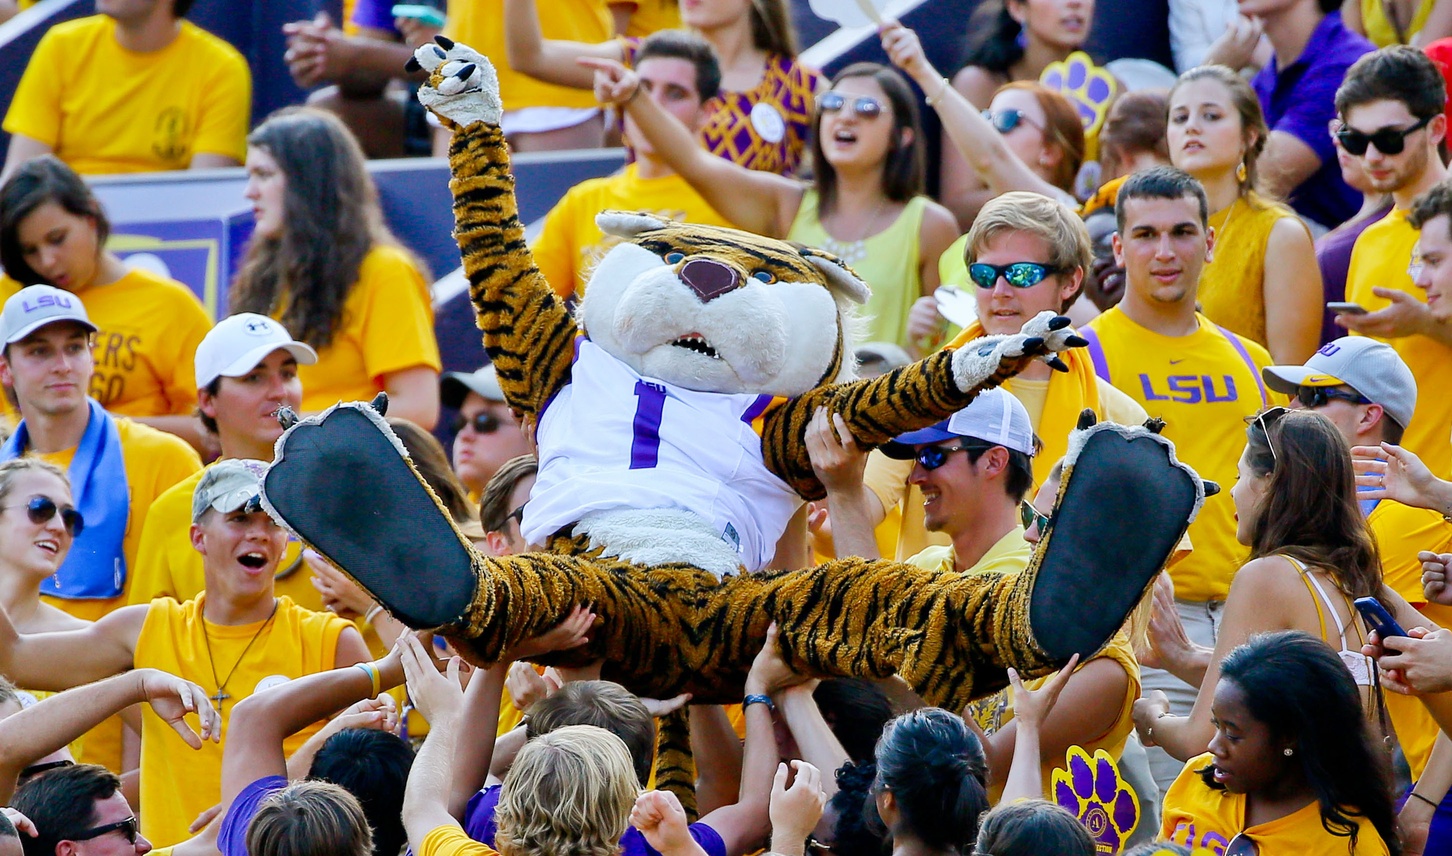 Sep 19, 2015; Baton Rouge, LA, USA; LSU Tigers mascot Mike the Tiger crowd surfs during the third quarter of a game against the Auburn Tigers at Tiger Stadium. Mandatory Credit: Derick E. Hingle-USA TODAY Sports